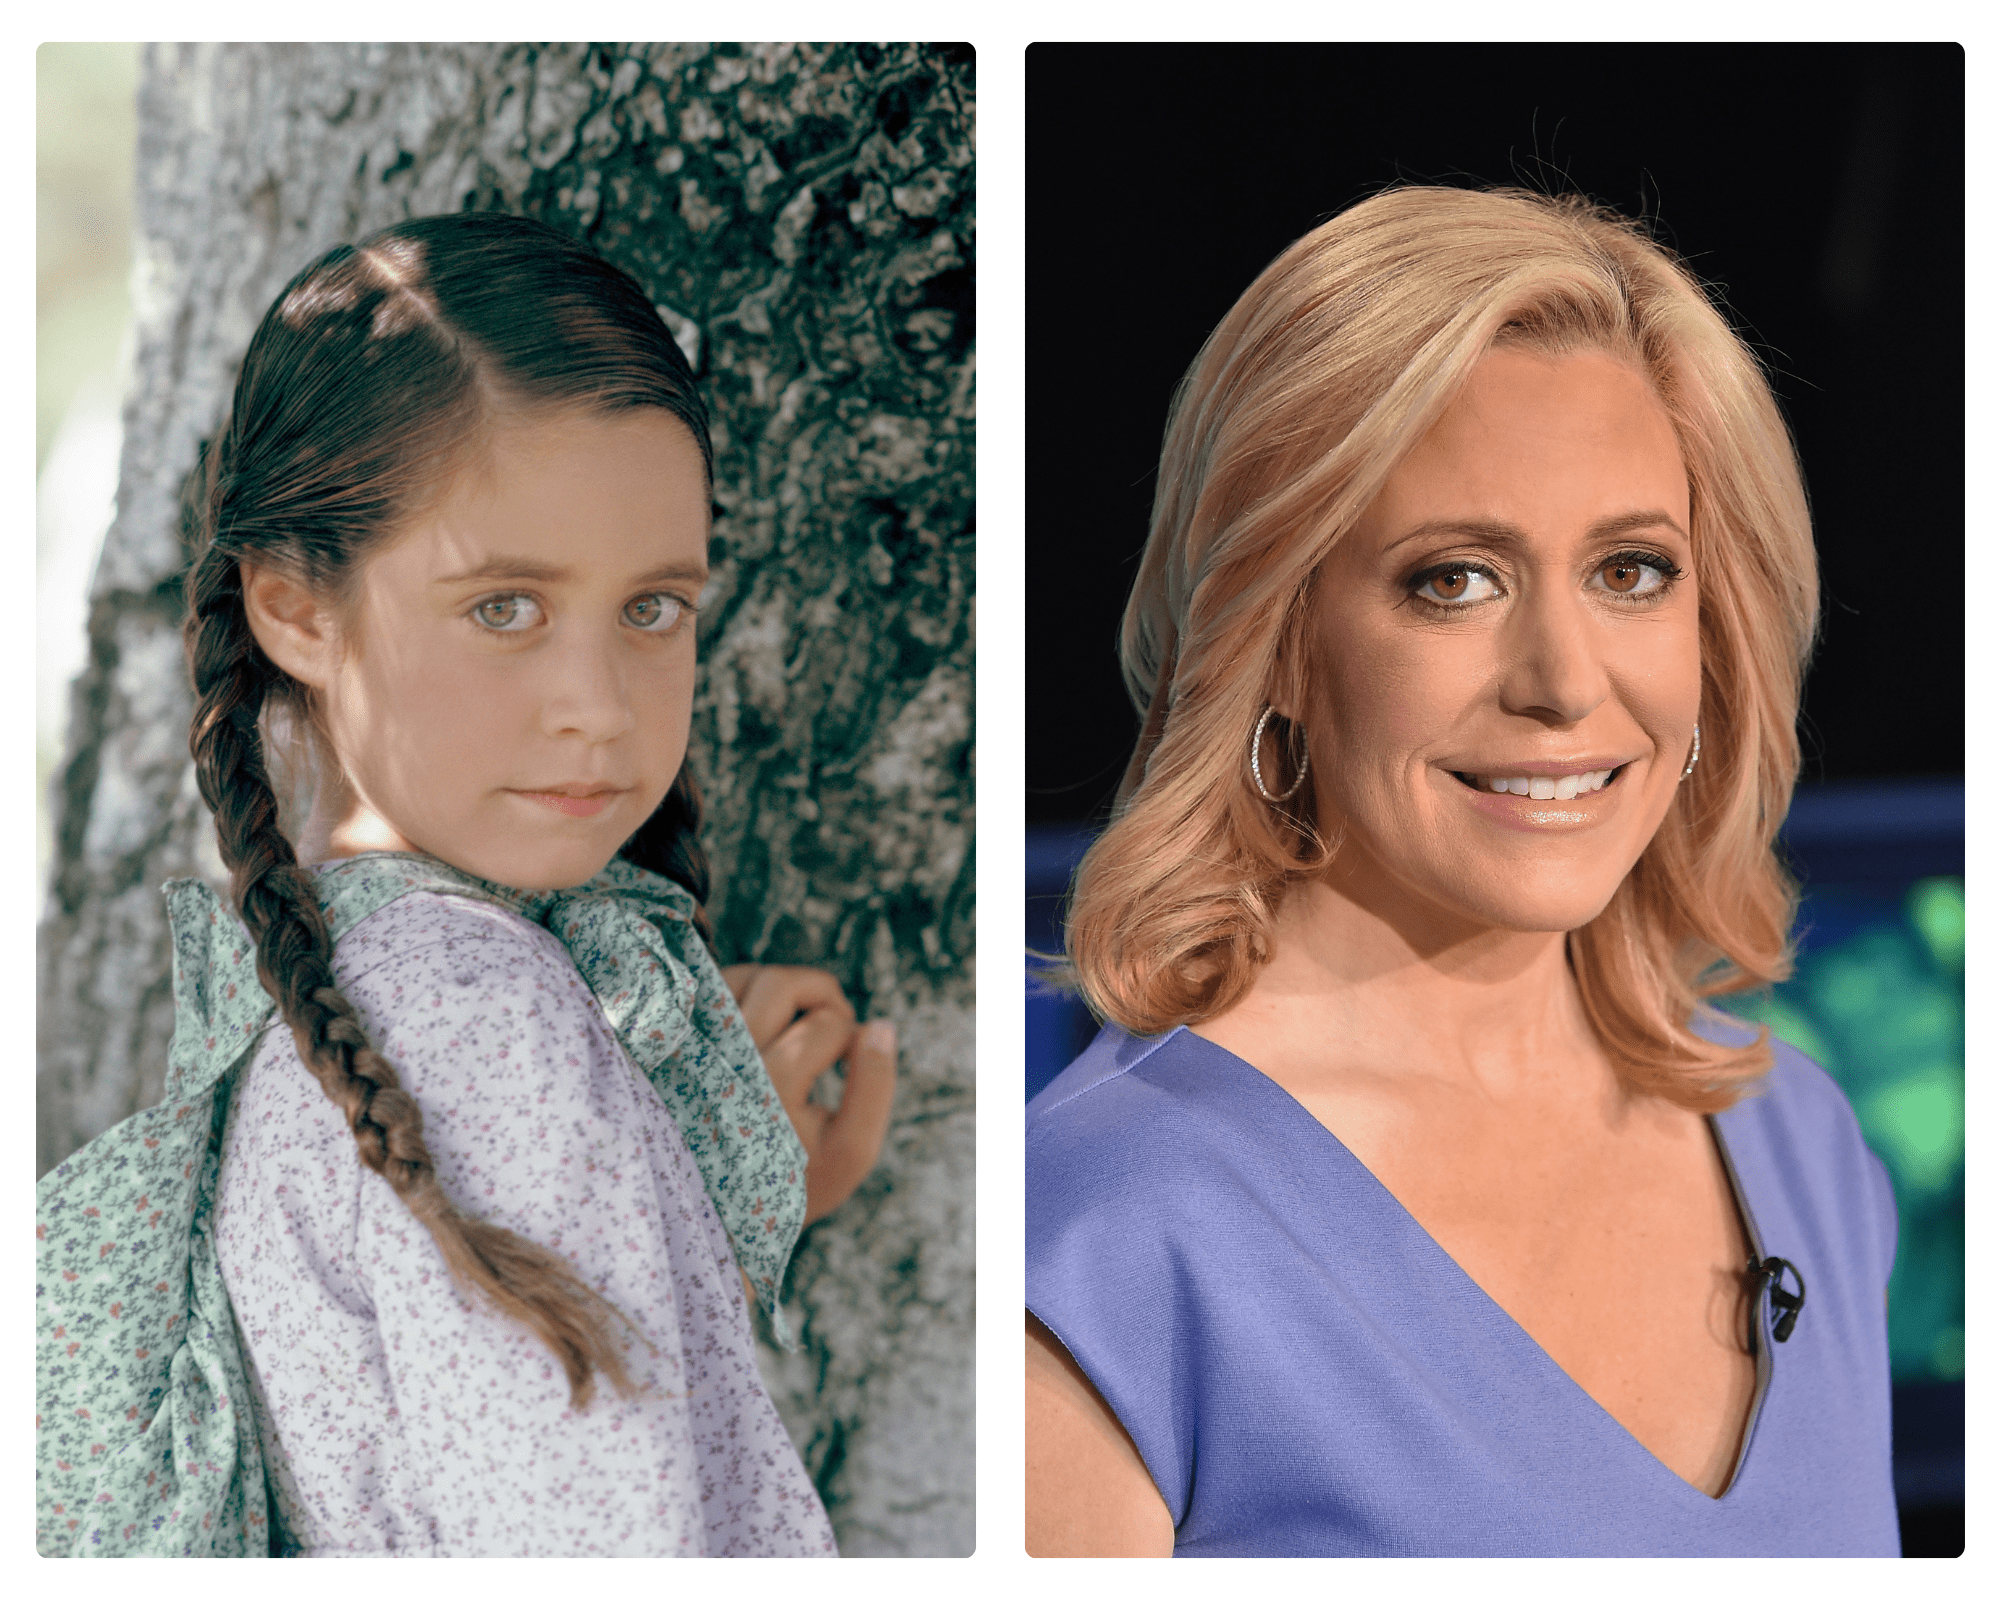 Melissa Francis | Source: Getty Images